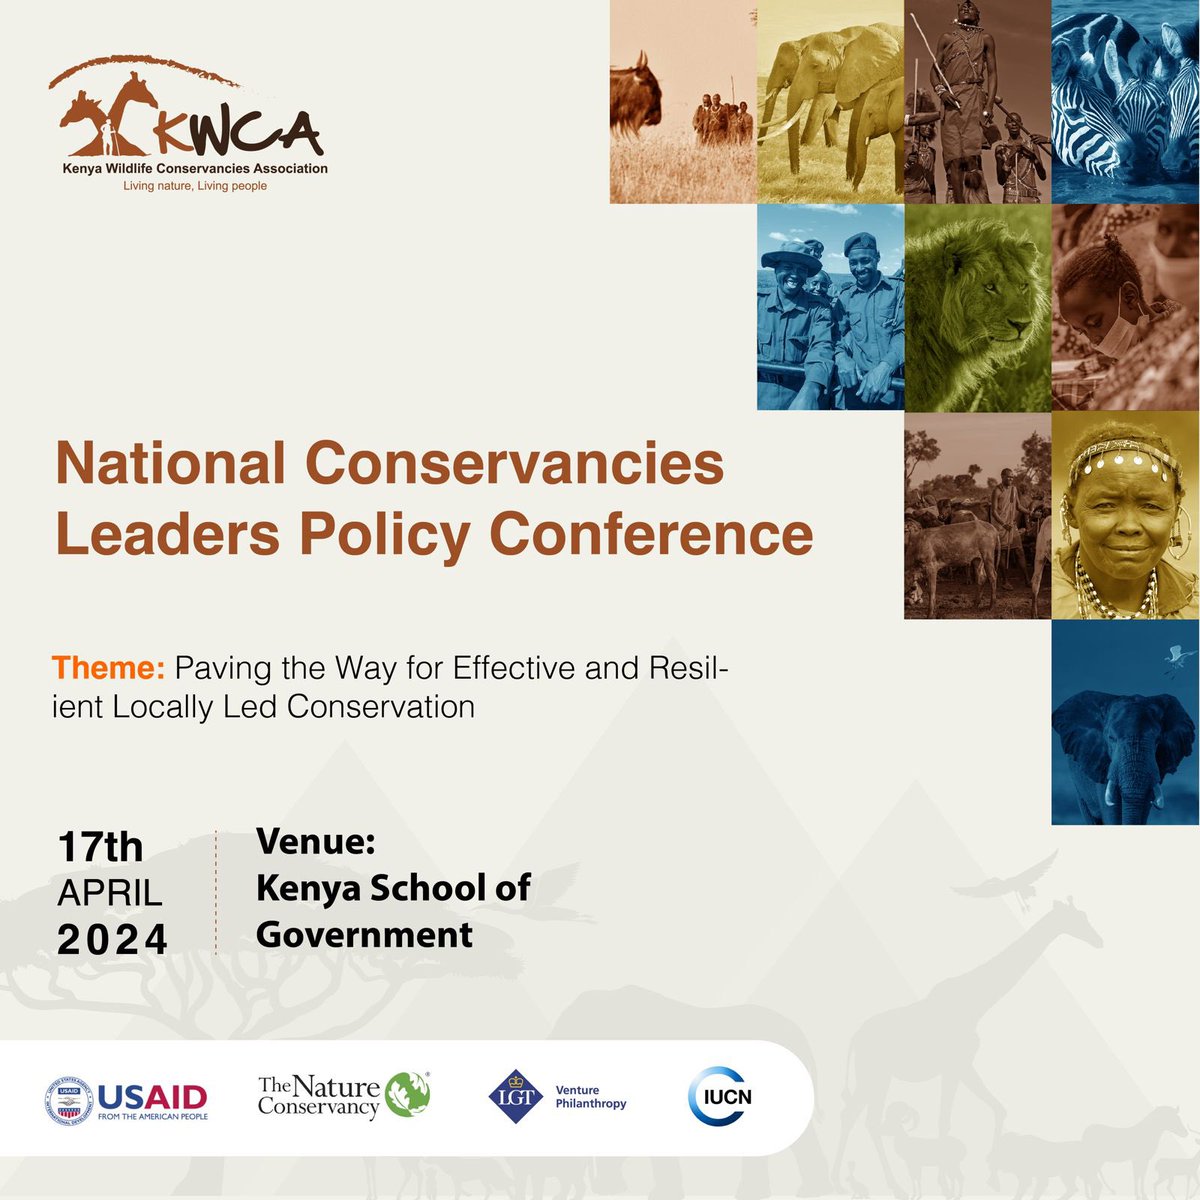 Happening Now: The National Conservancies Leaders Policy Conference and AGM 2024. #ConservancyPolicyConference